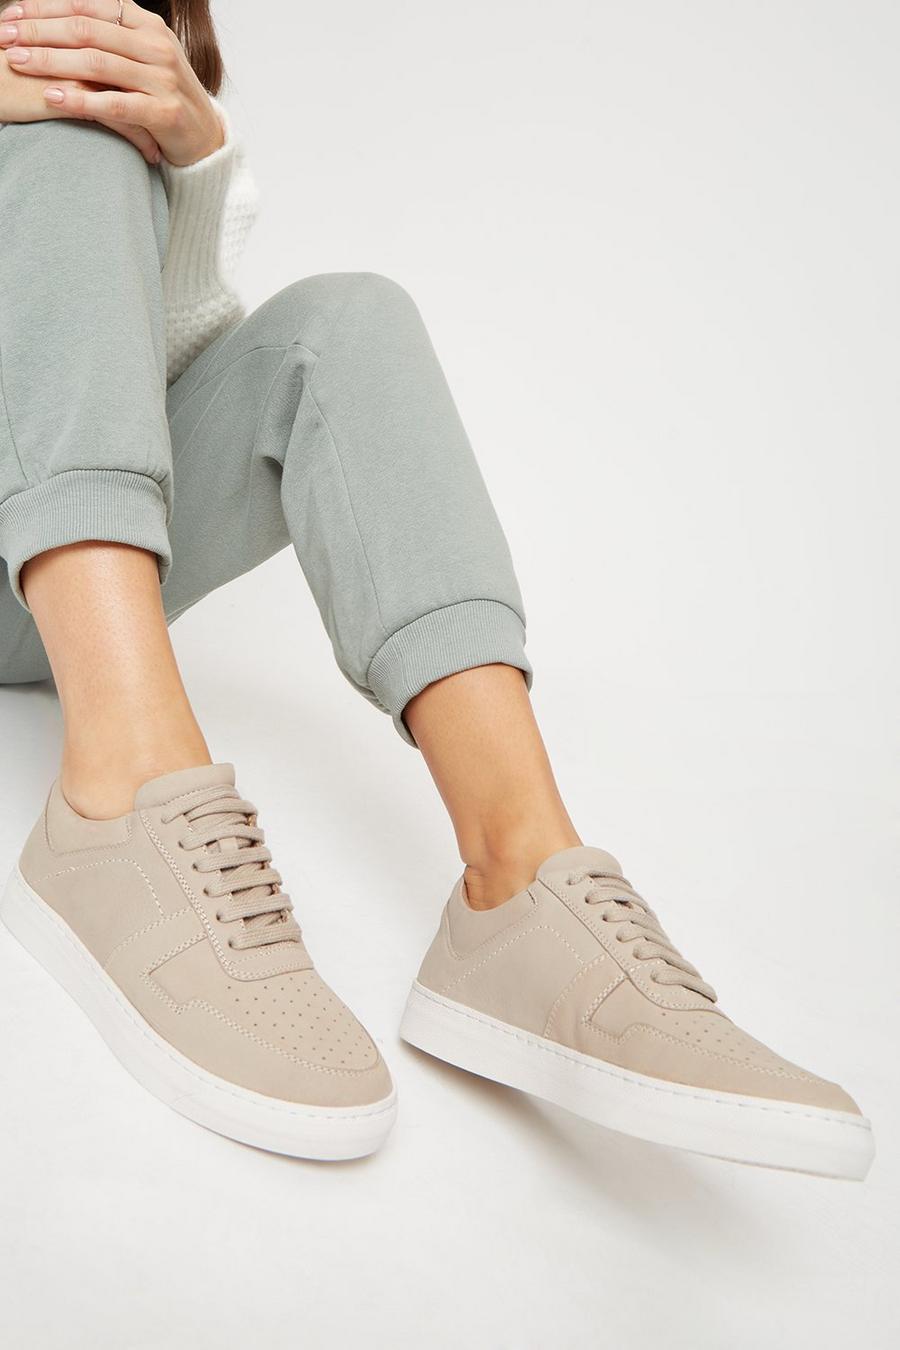 Good For The Sole: Indie Comfort Leather Trainers